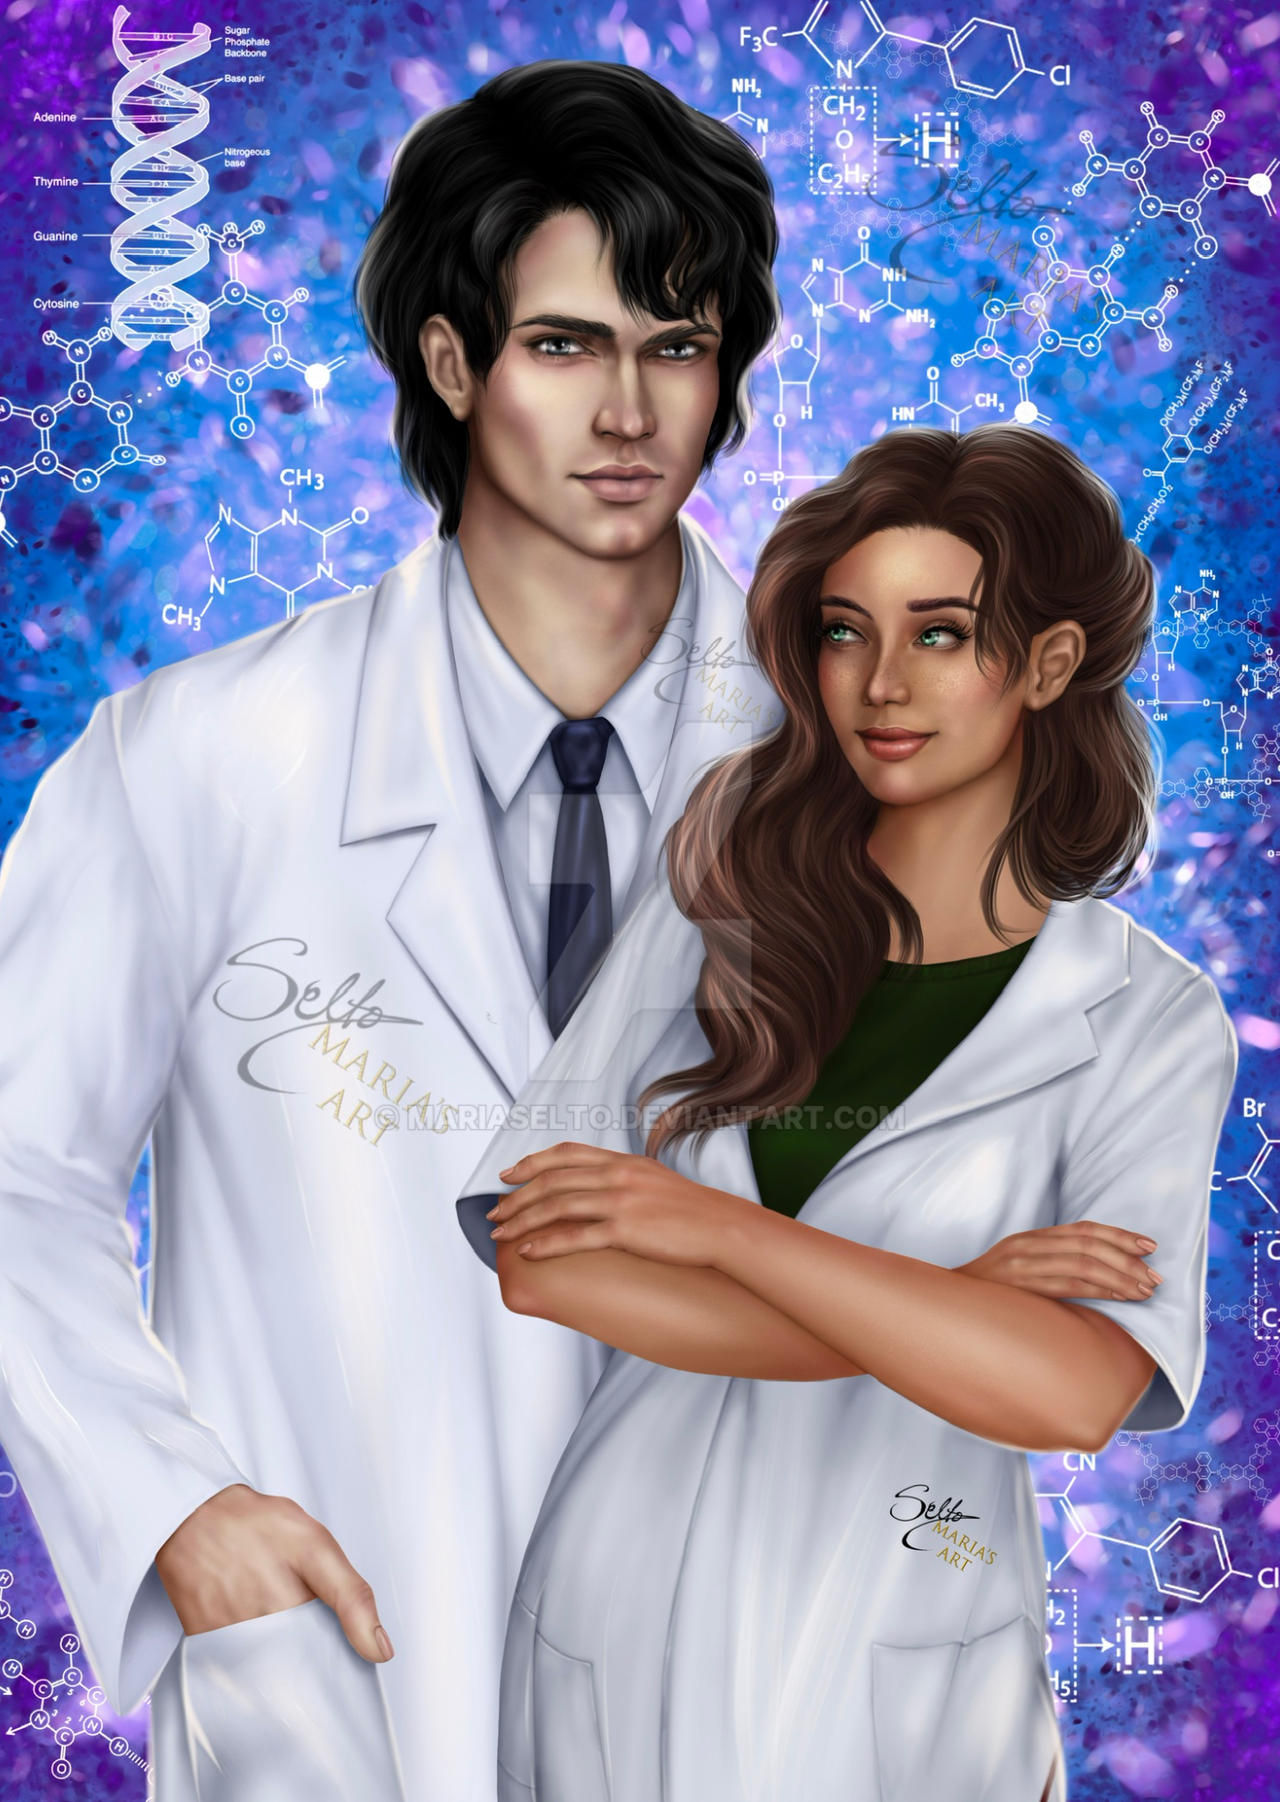 The Love Hypothesis - Olive and Adam commission by MariaSelto on DeviantArt